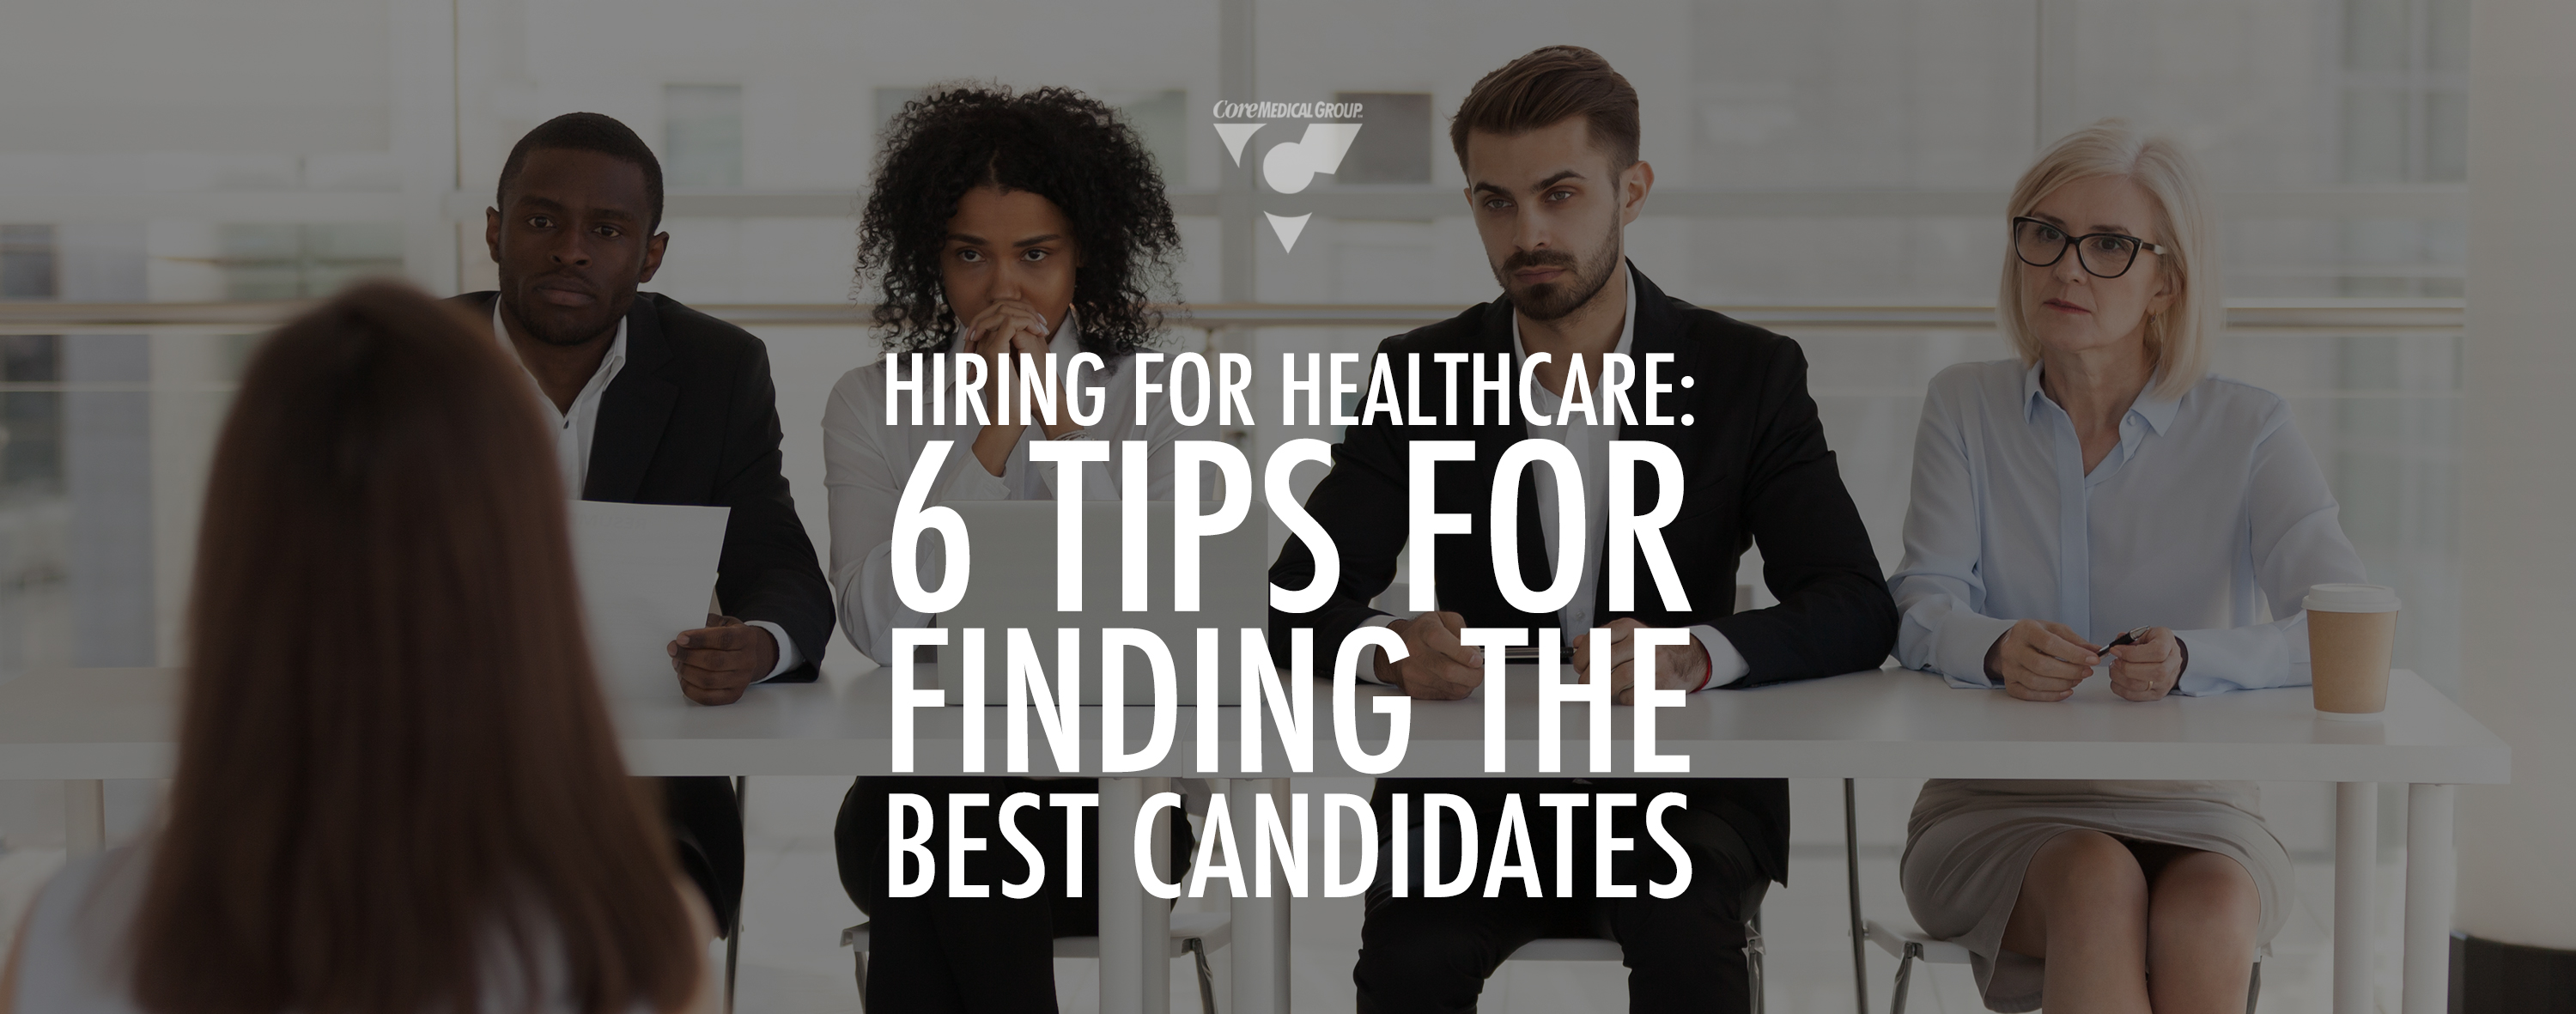 Hiring for Healthcare" 6 Tips for Finding the Best Candidates